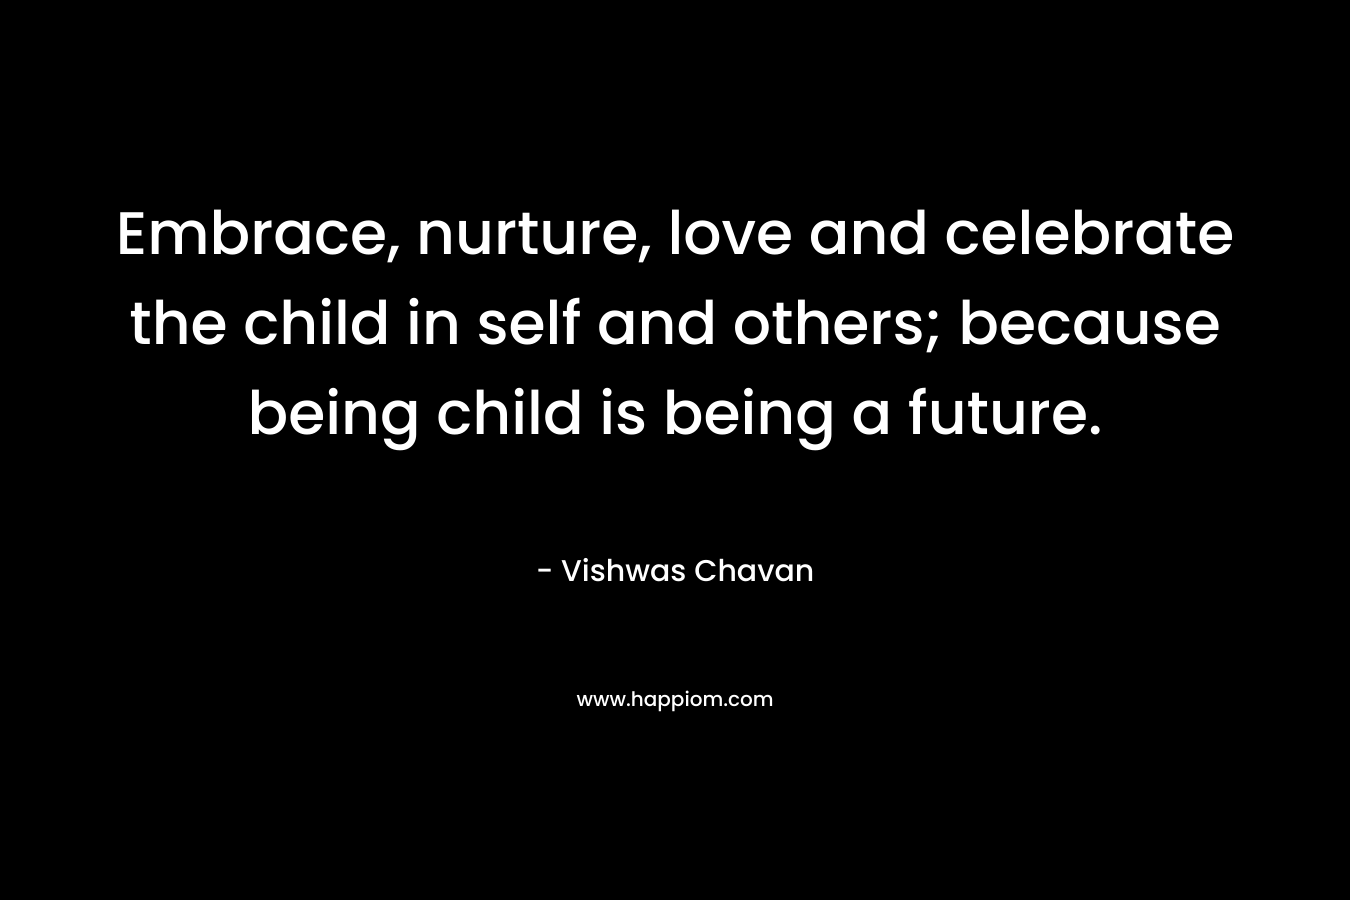 Embrace, nurture, love and celebrate the child in self and others; because being child is being a future.